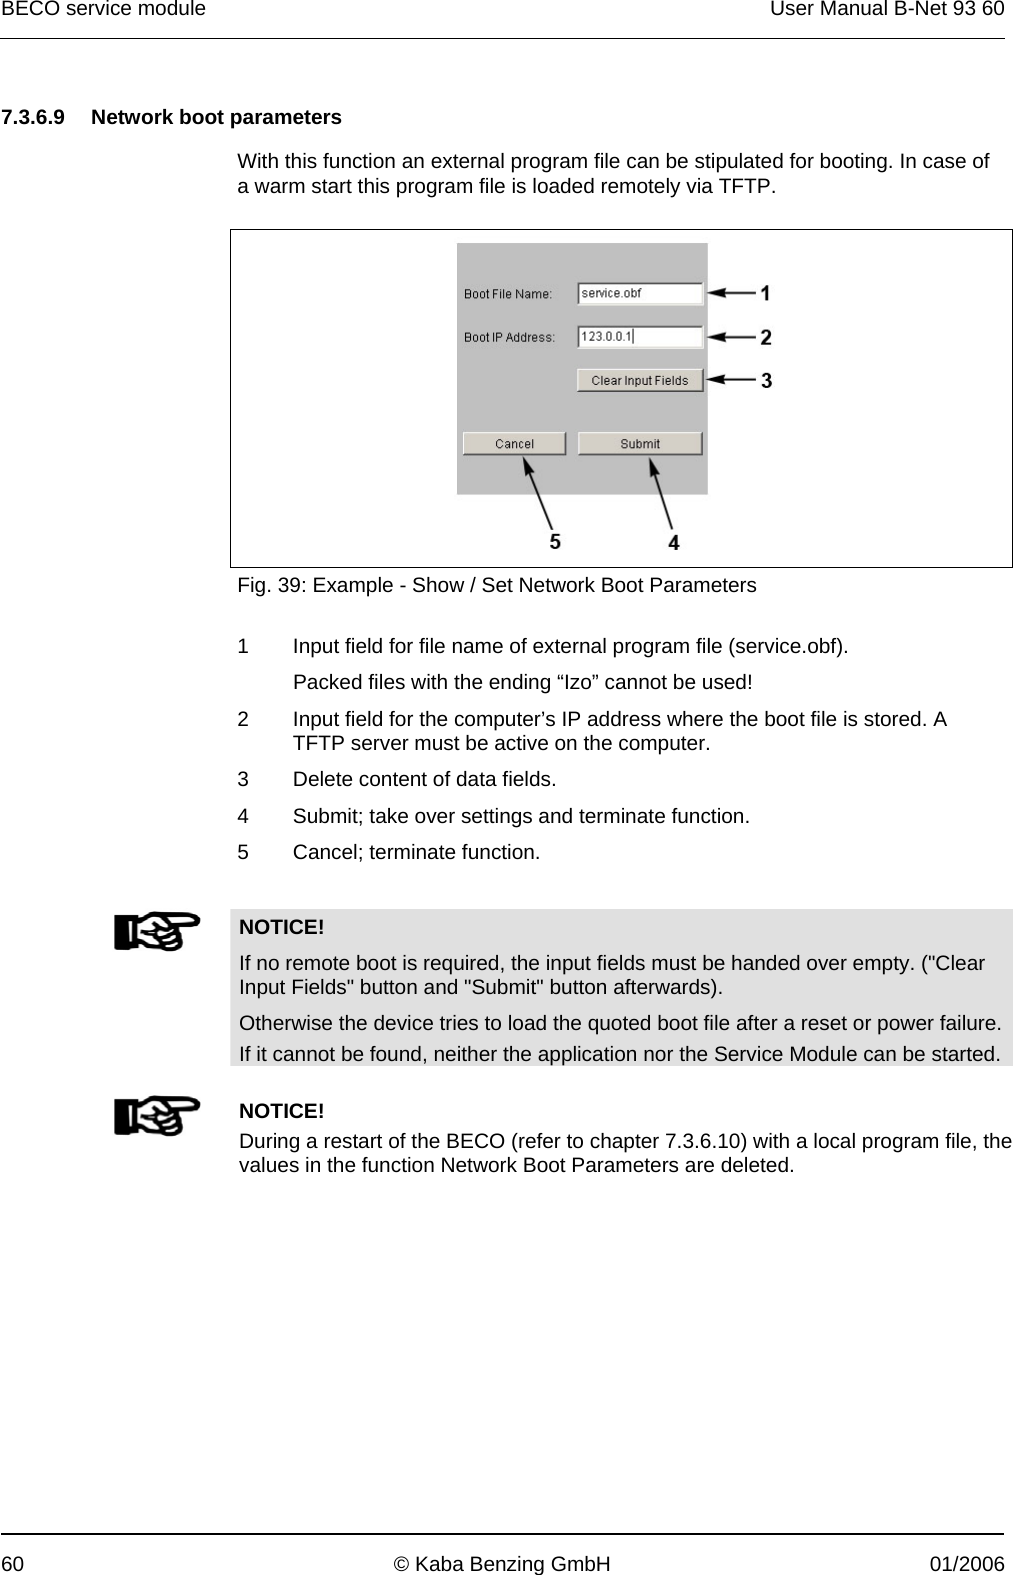 BECO service module  User Manual B-Net 93 60 60  © Kaba Benzing GmbH  01/2006   7.3.6.9  Network boot parameters  With this function an external program file can be stipulated for booting. In case of a warm start this program file is loaded remotely via TFTP.    Fig. 39: Example - Show / Set Network Boot Parameters  1  Input field for file name of external program file (service.obf). Packed files with the ending “Izo” cannot be used! 2  Input field for the computer’s IP address where the boot file is stored. A TFTP server must be active on the computer. 3  Delete content of data fields. 4  Submit; take over settings and terminate function. 5  Cancel; terminate function.    NOTICE! If no remote boot is required, the input fields must be handed over empty. (&quot;Clear Input Fields&quot; button and &quot;Submit&quot; button afterwards). Otherwise the device tries to load the quoted boot file after a reset or power failure. If it cannot be found, neither the application nor the Service Module can be started.     NOTICE! During a restart of the BECO (refer to chapter 7.3.6.10) with a local program file, the values in the function Network Boot Parameters are deleted.  